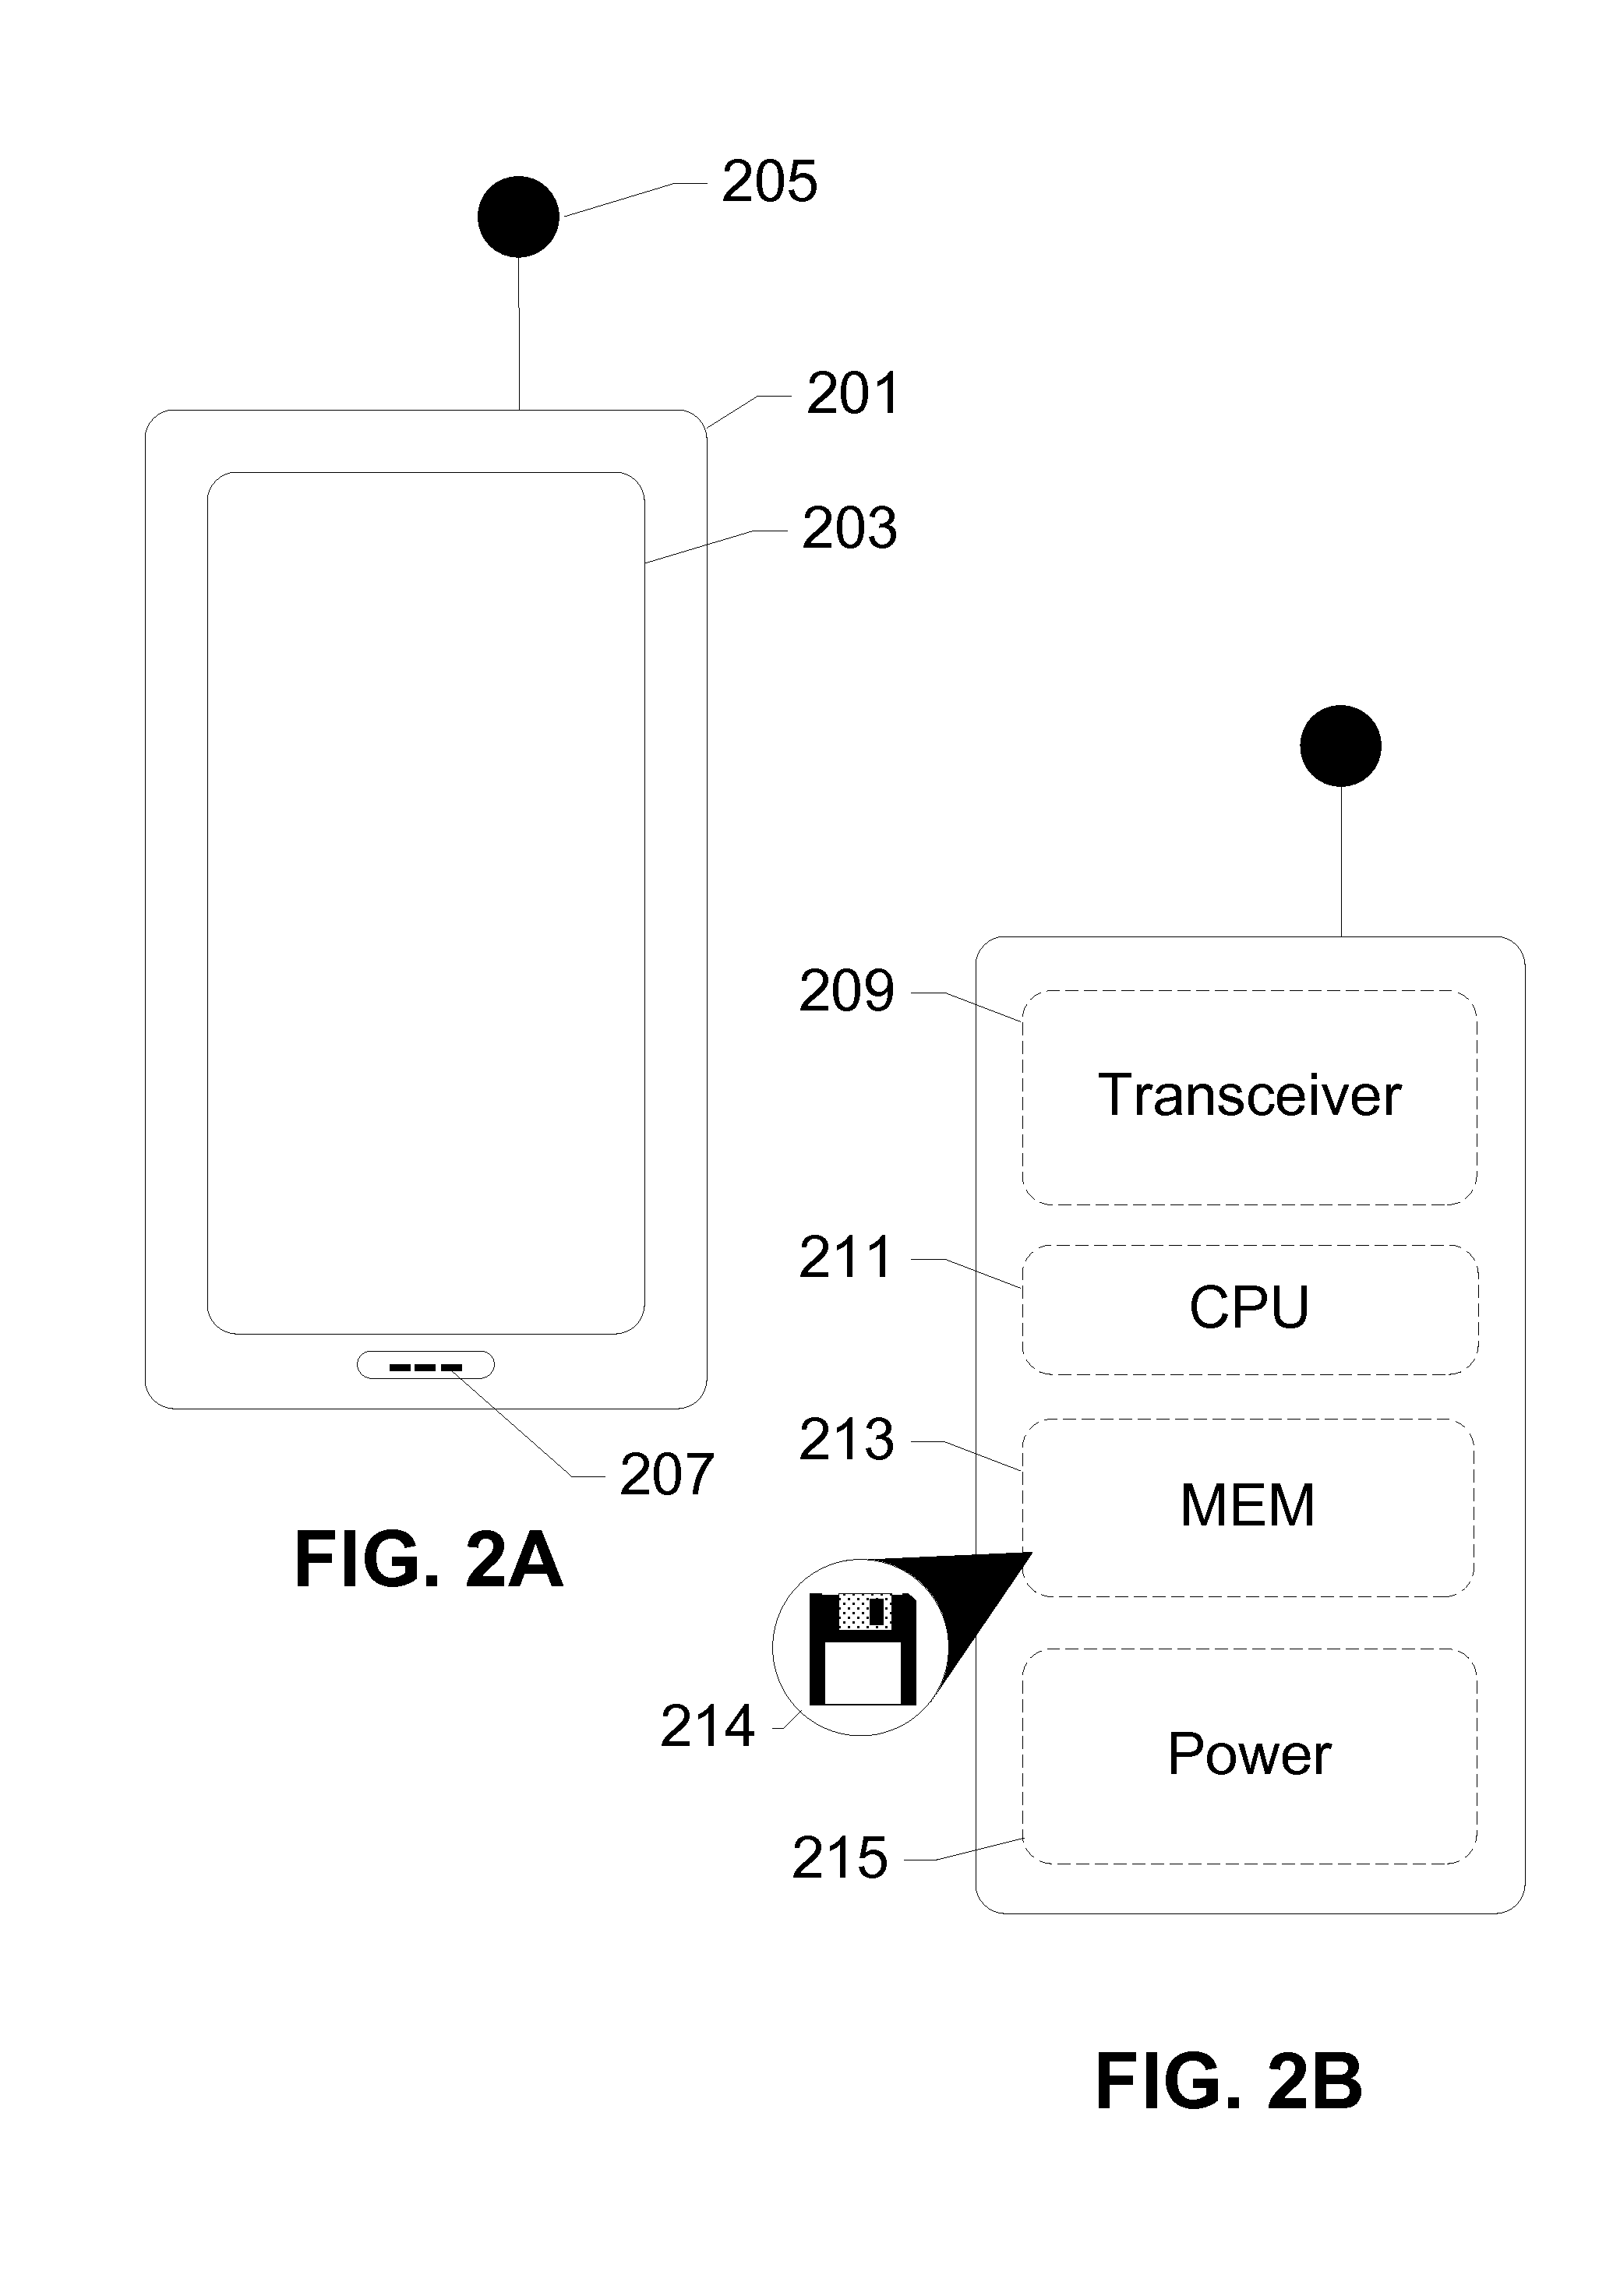 Remote Control of Electronic Devices Via Mobile Device